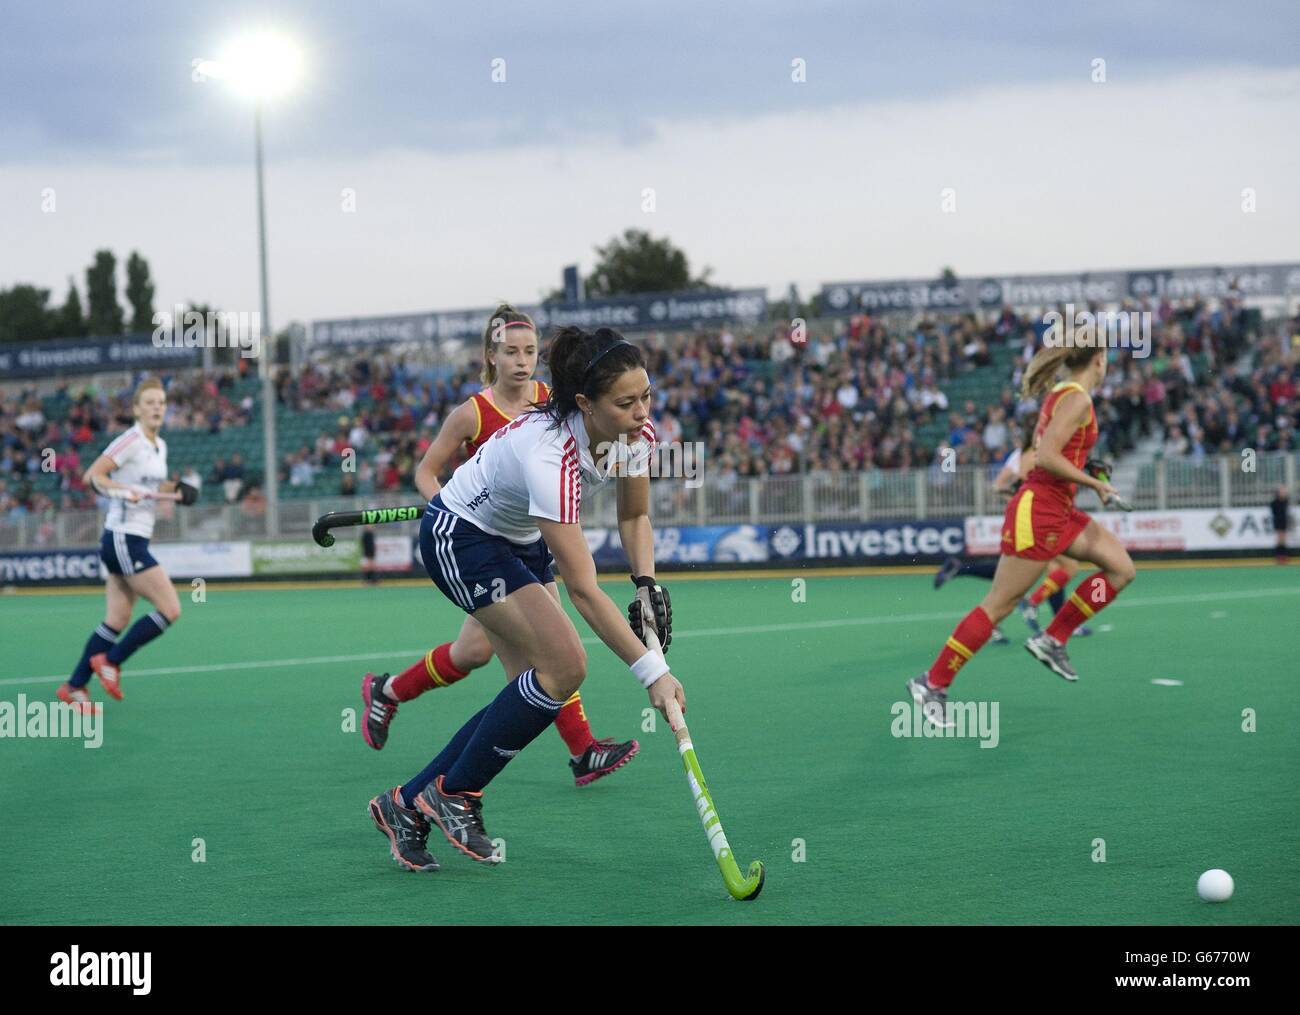 England's Sam Quek during the Investec World League Semi Finals, Chiswick. Stock Photo